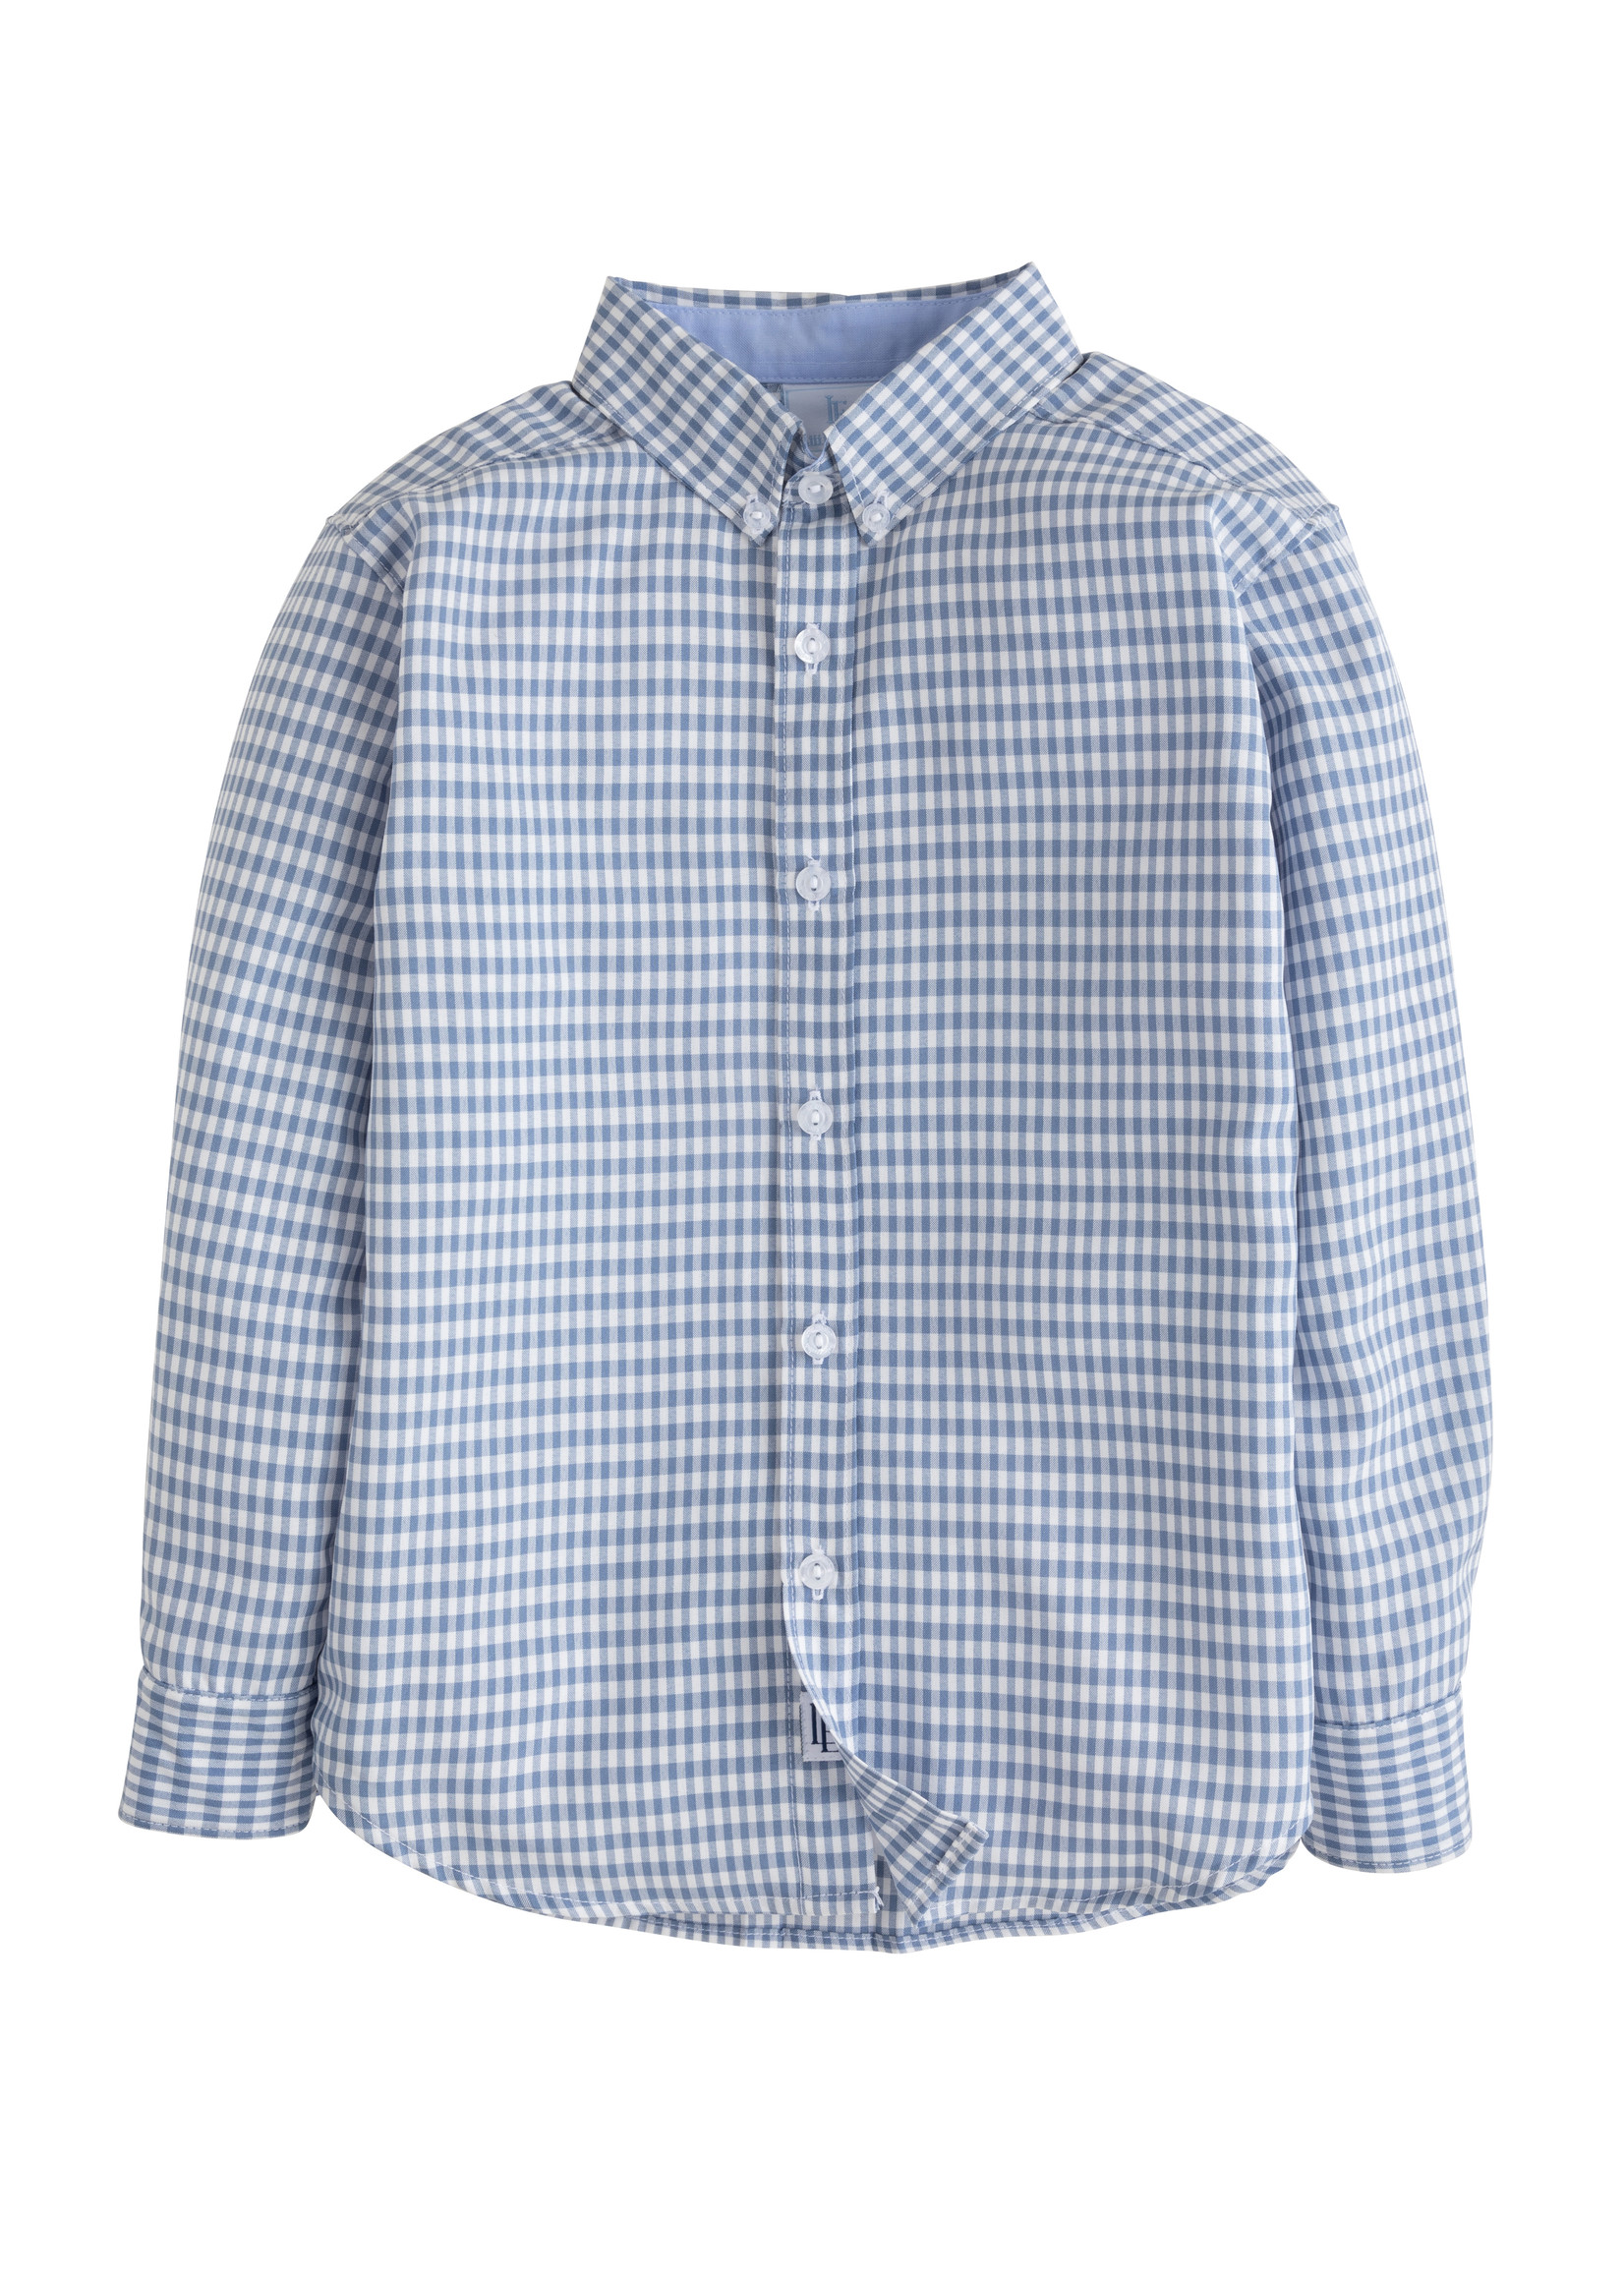 Little English Gray Blue Gingham Button Down